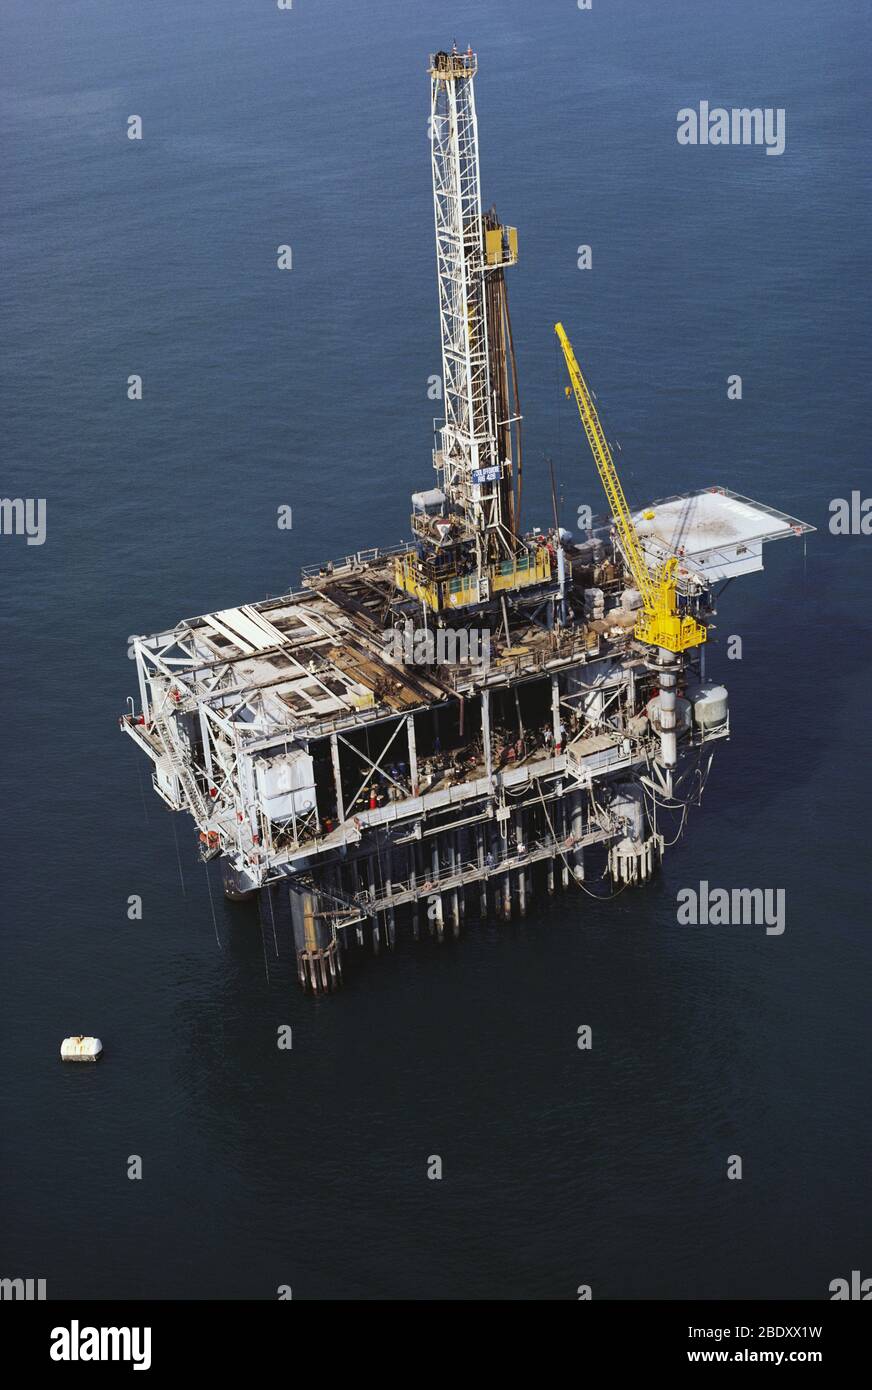 Offshore drilling rig Stock Photo